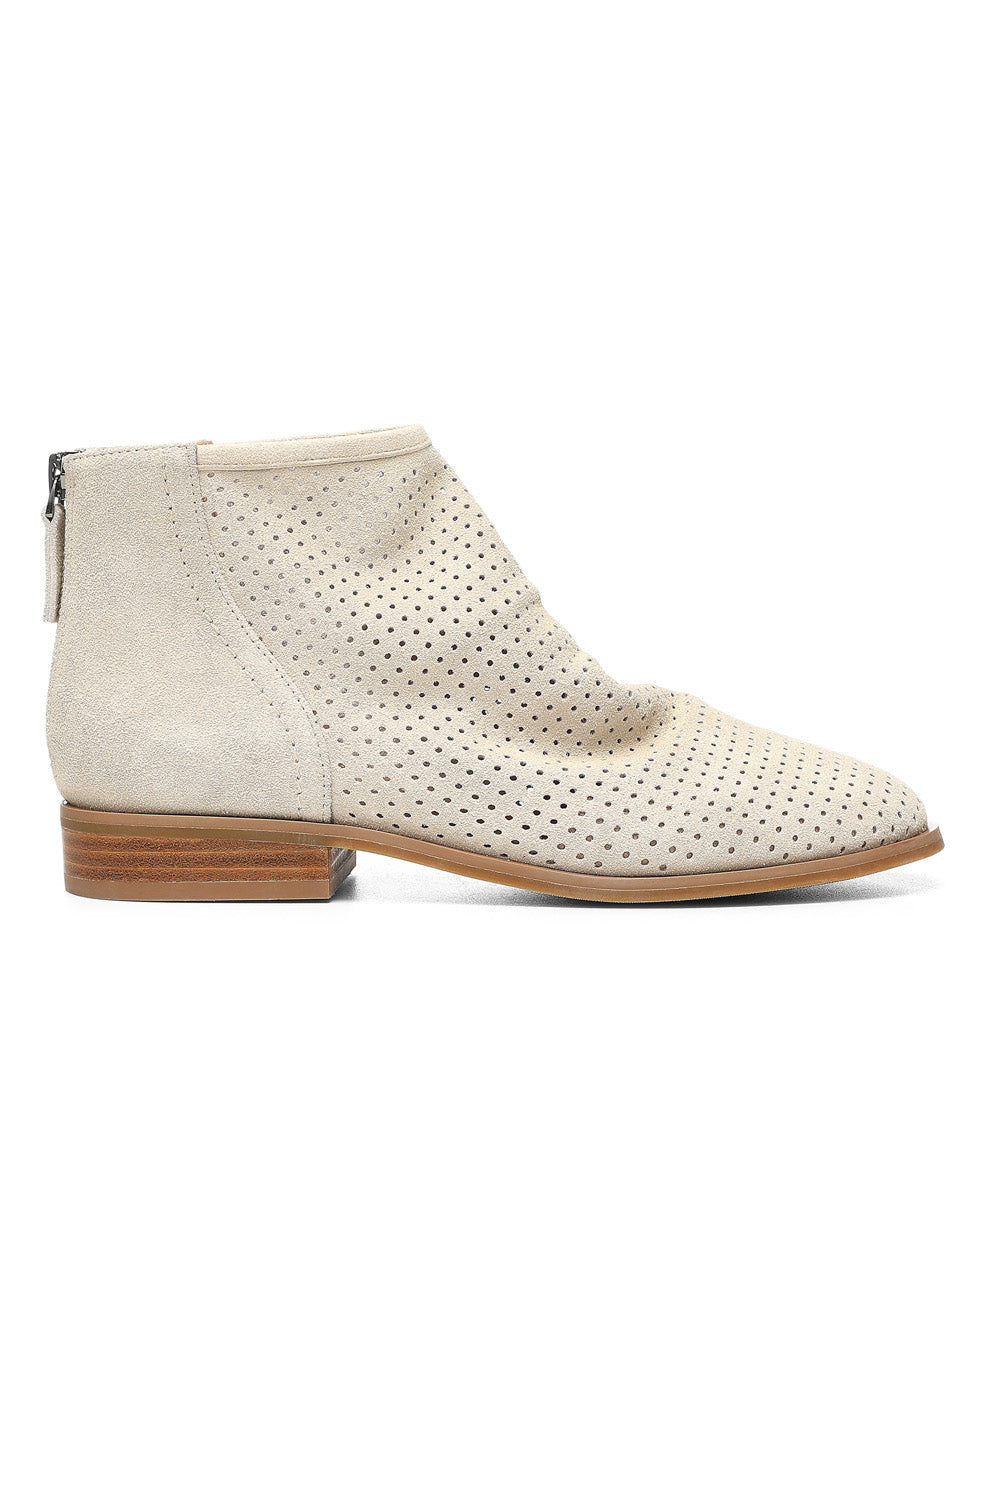 NYDJ Cailian Booties In Suede - Sand